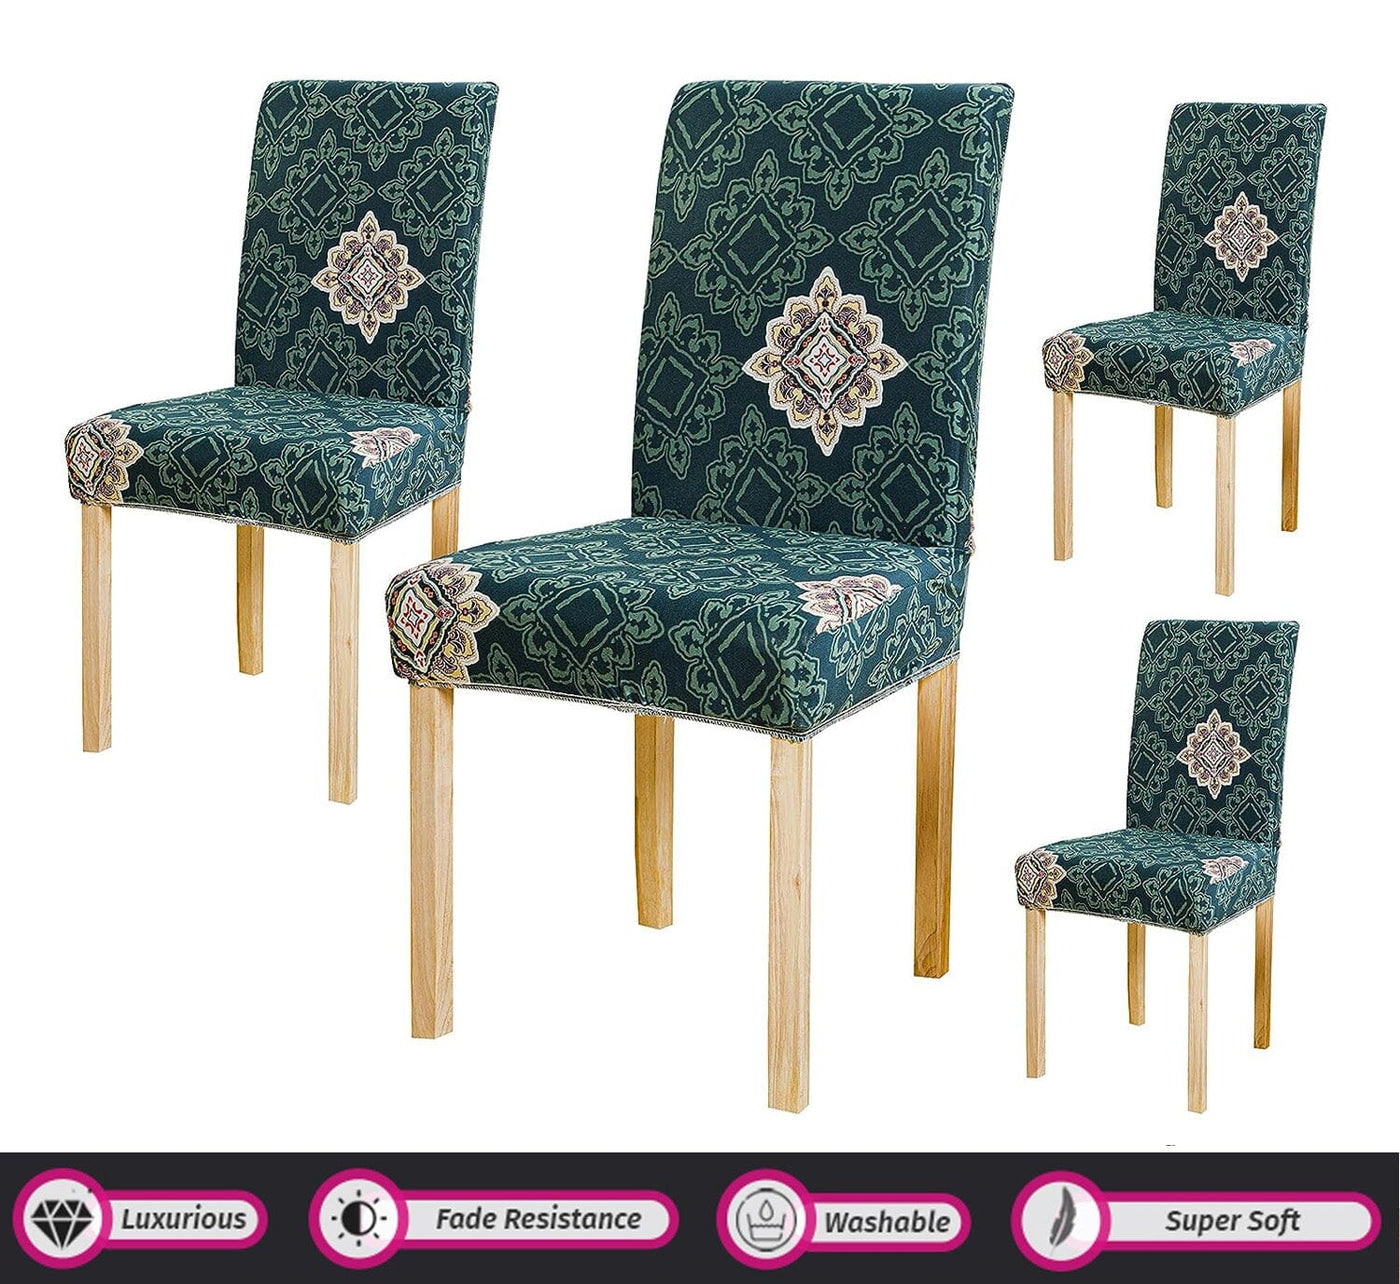 Premium Chair Cover - Stretchable & Elastic Fitted Great Happy IN Green Brocade 2 PCS - ₹799 